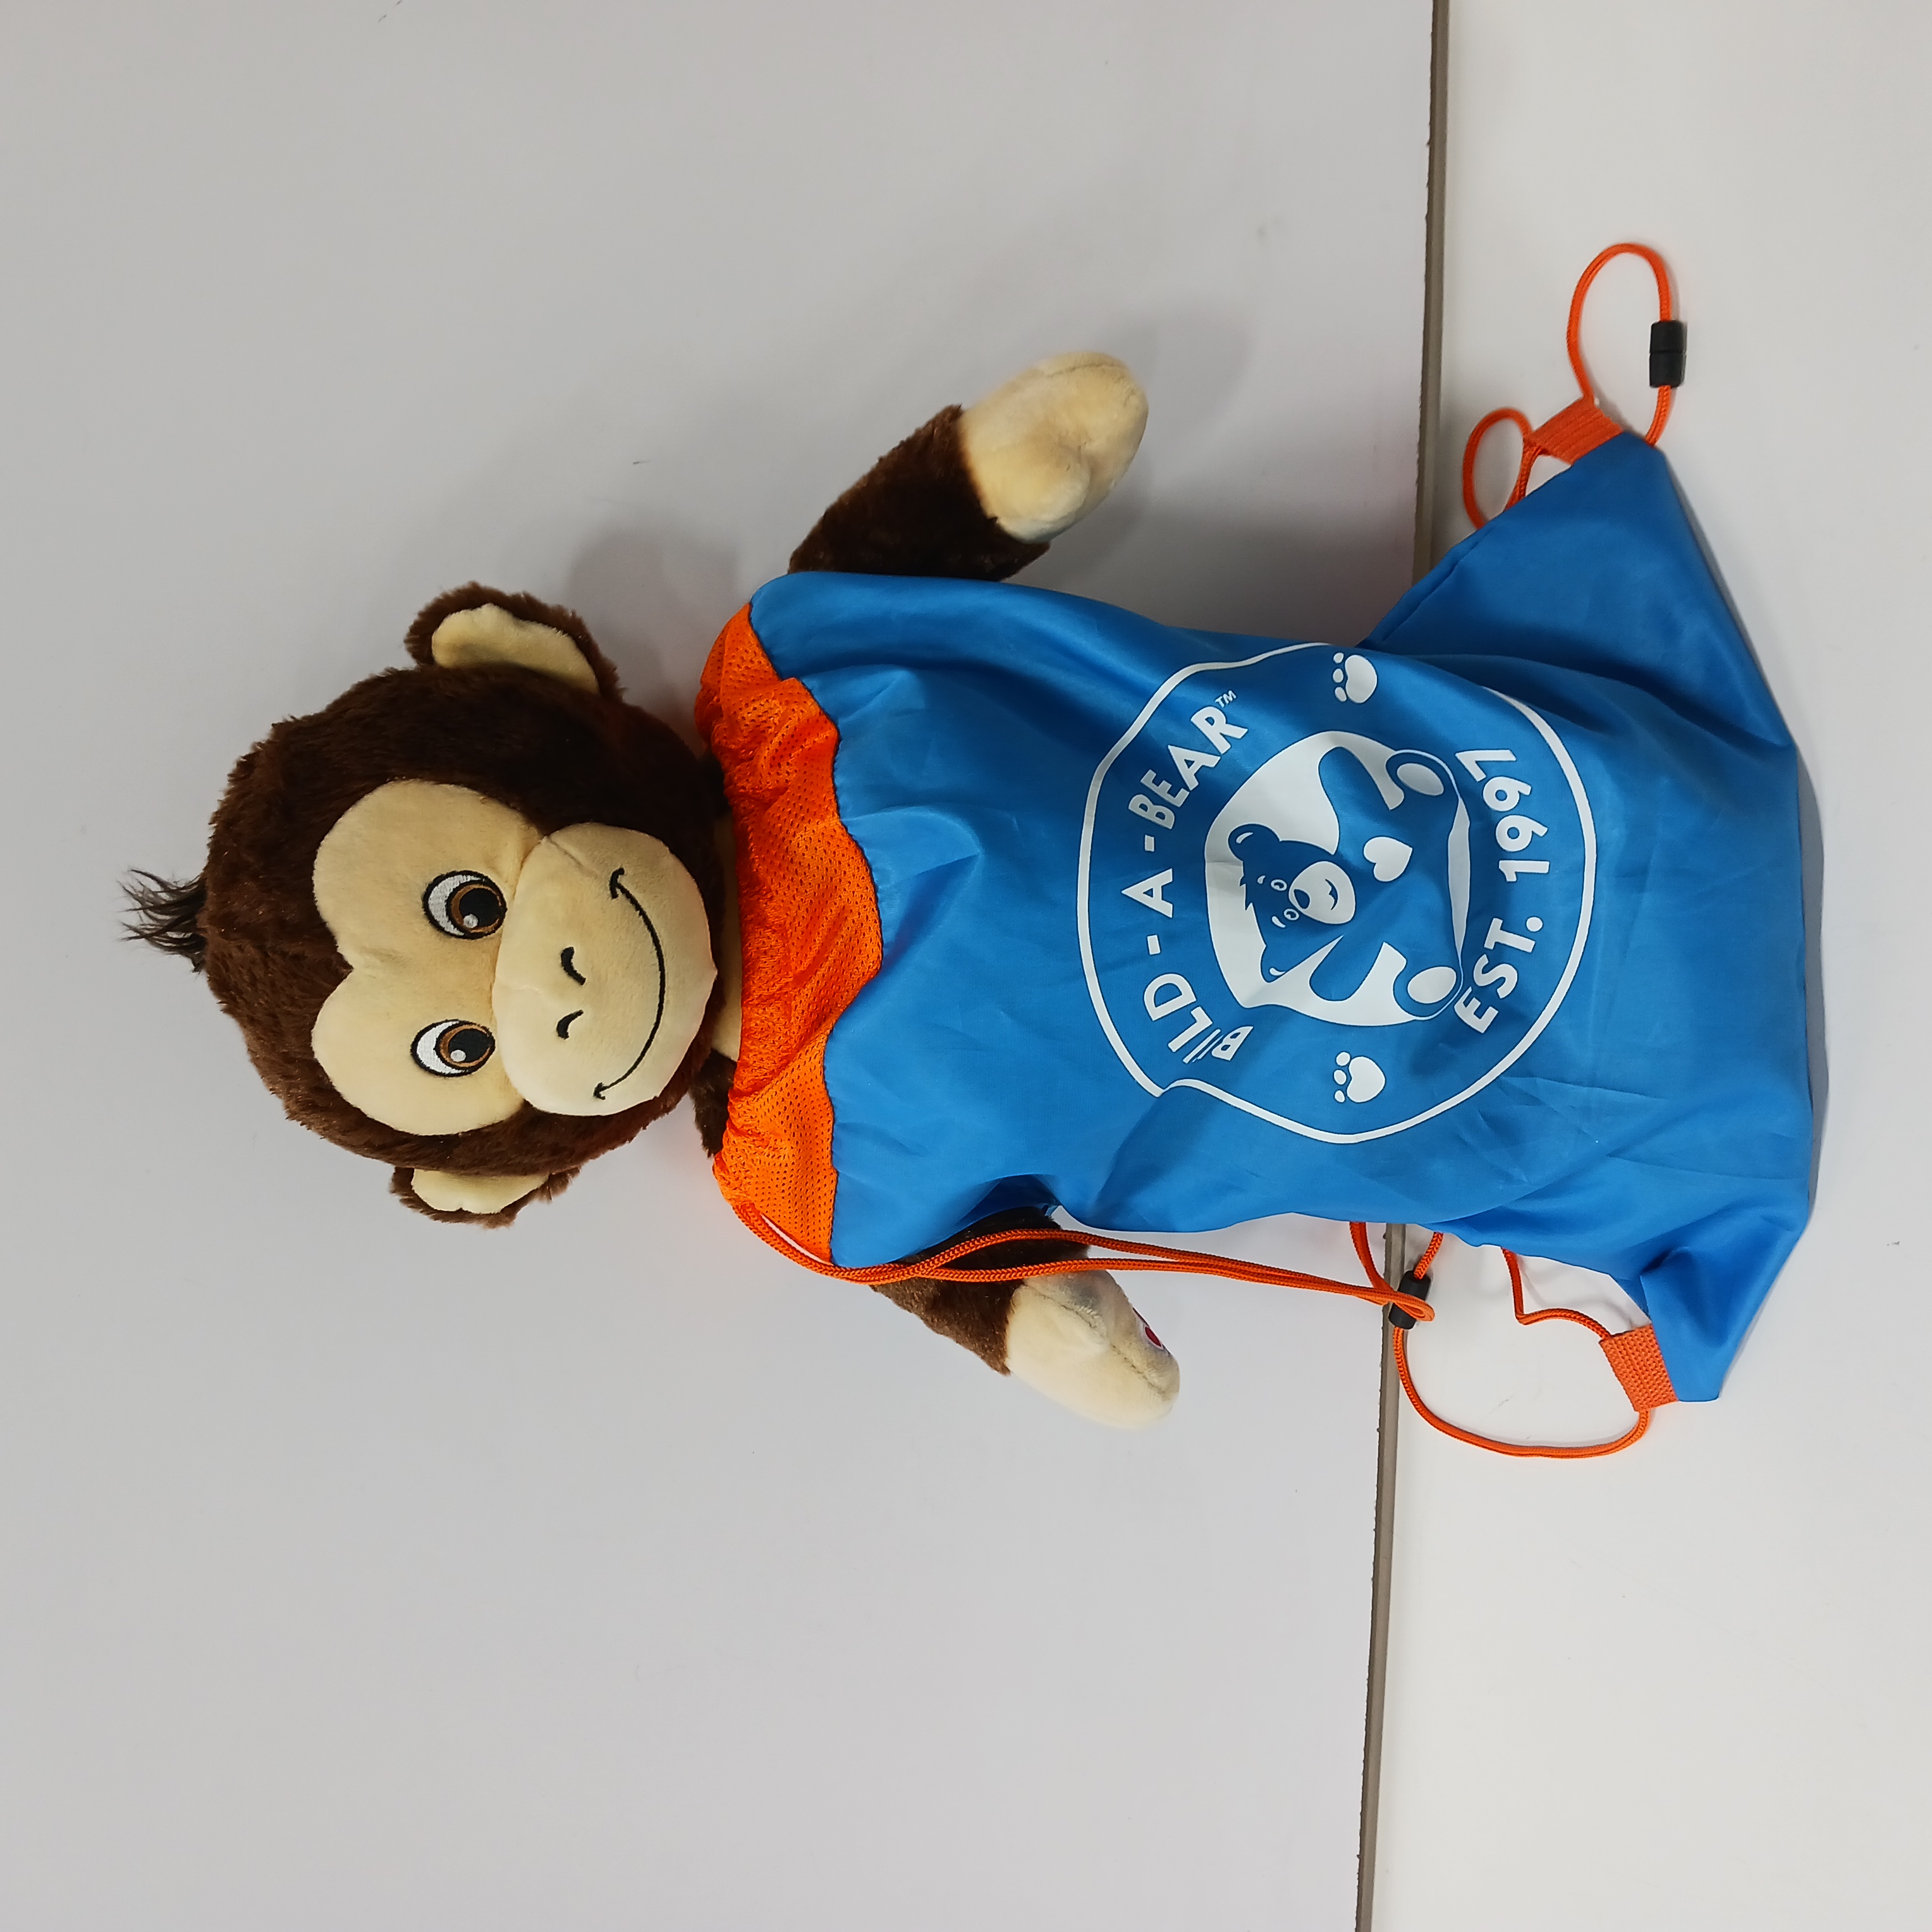 Monkey Dolores, A Stuffed Toy, Factory Direct for Any Marketing Campaign |  Best Plush, Inc